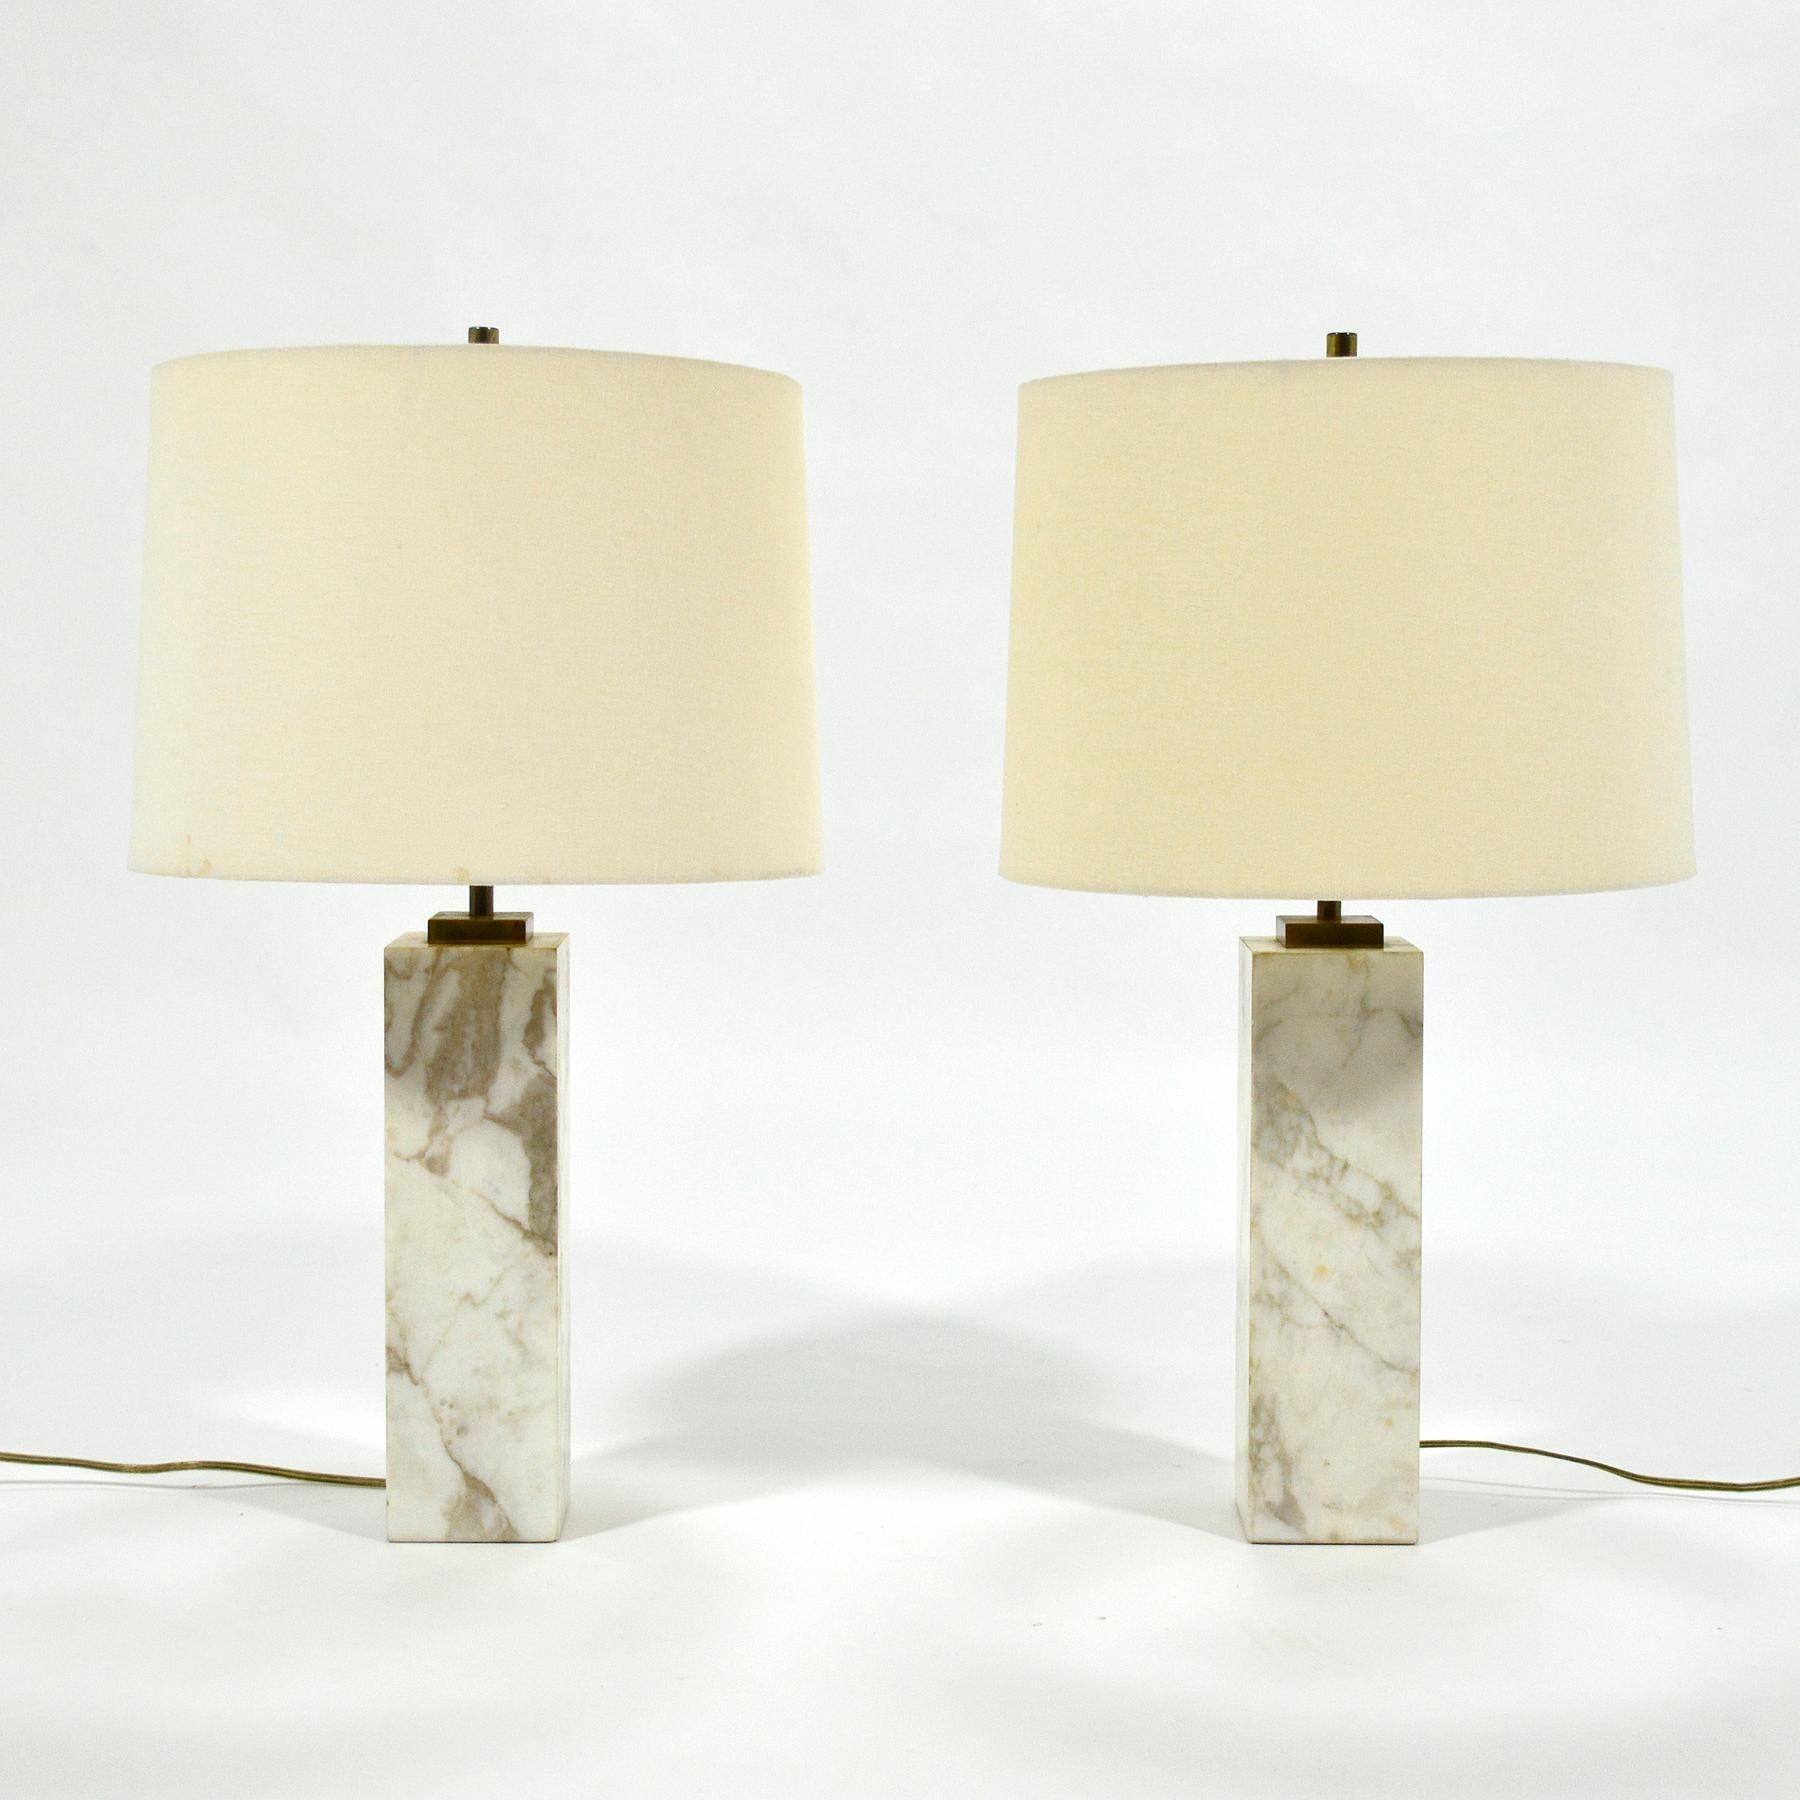 A sublime design by Robsjohn-Gibbings, this pair of model no. 180 table lamps take a minimalist design and luxurious materials to their logical conclusion. Rectangular bases of beautifully figured 